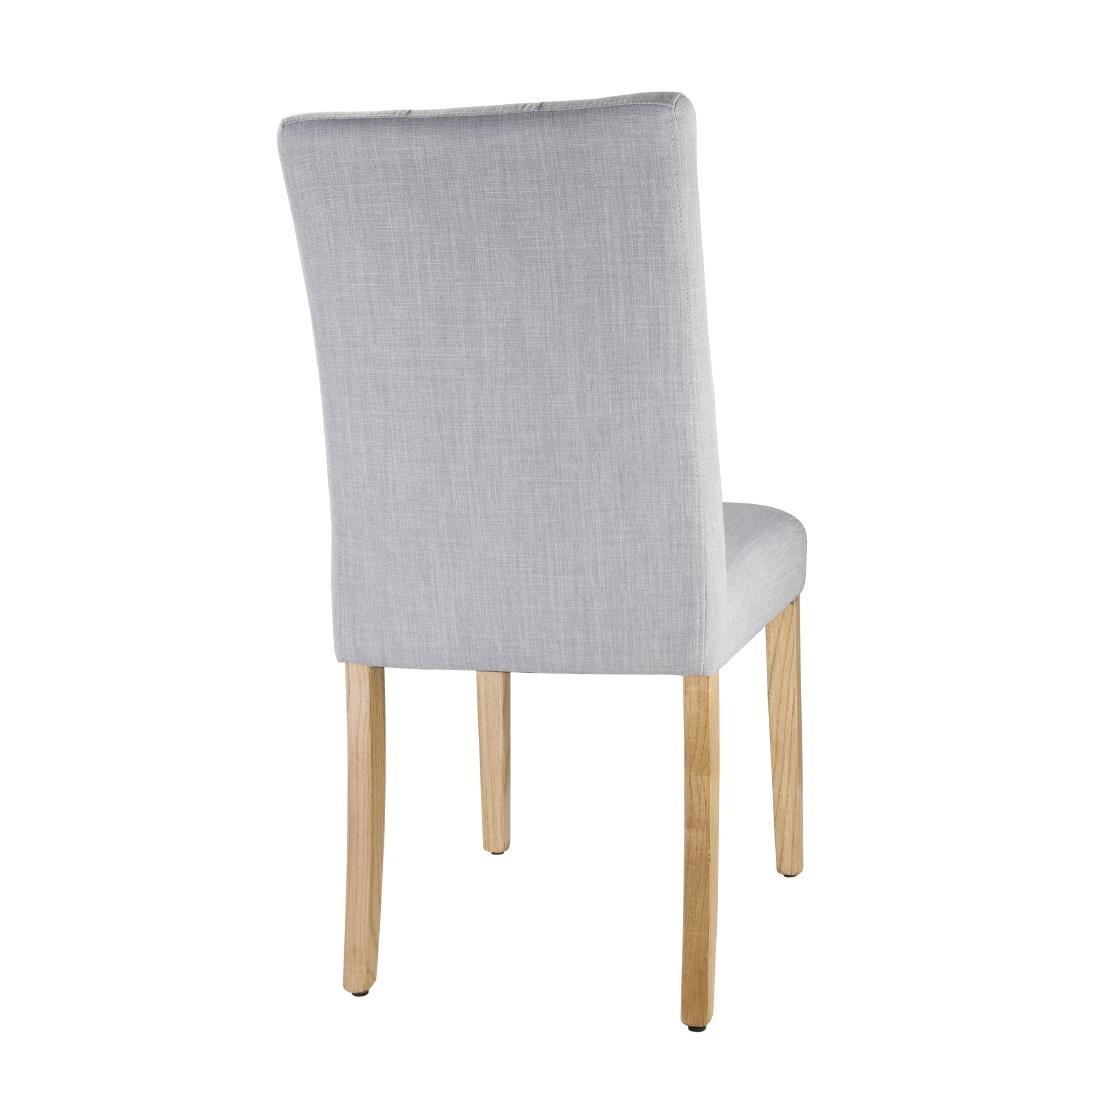 Bolero Chiswick Button Dining Chairs French Grey (Pack of 2) - DT698  - 3